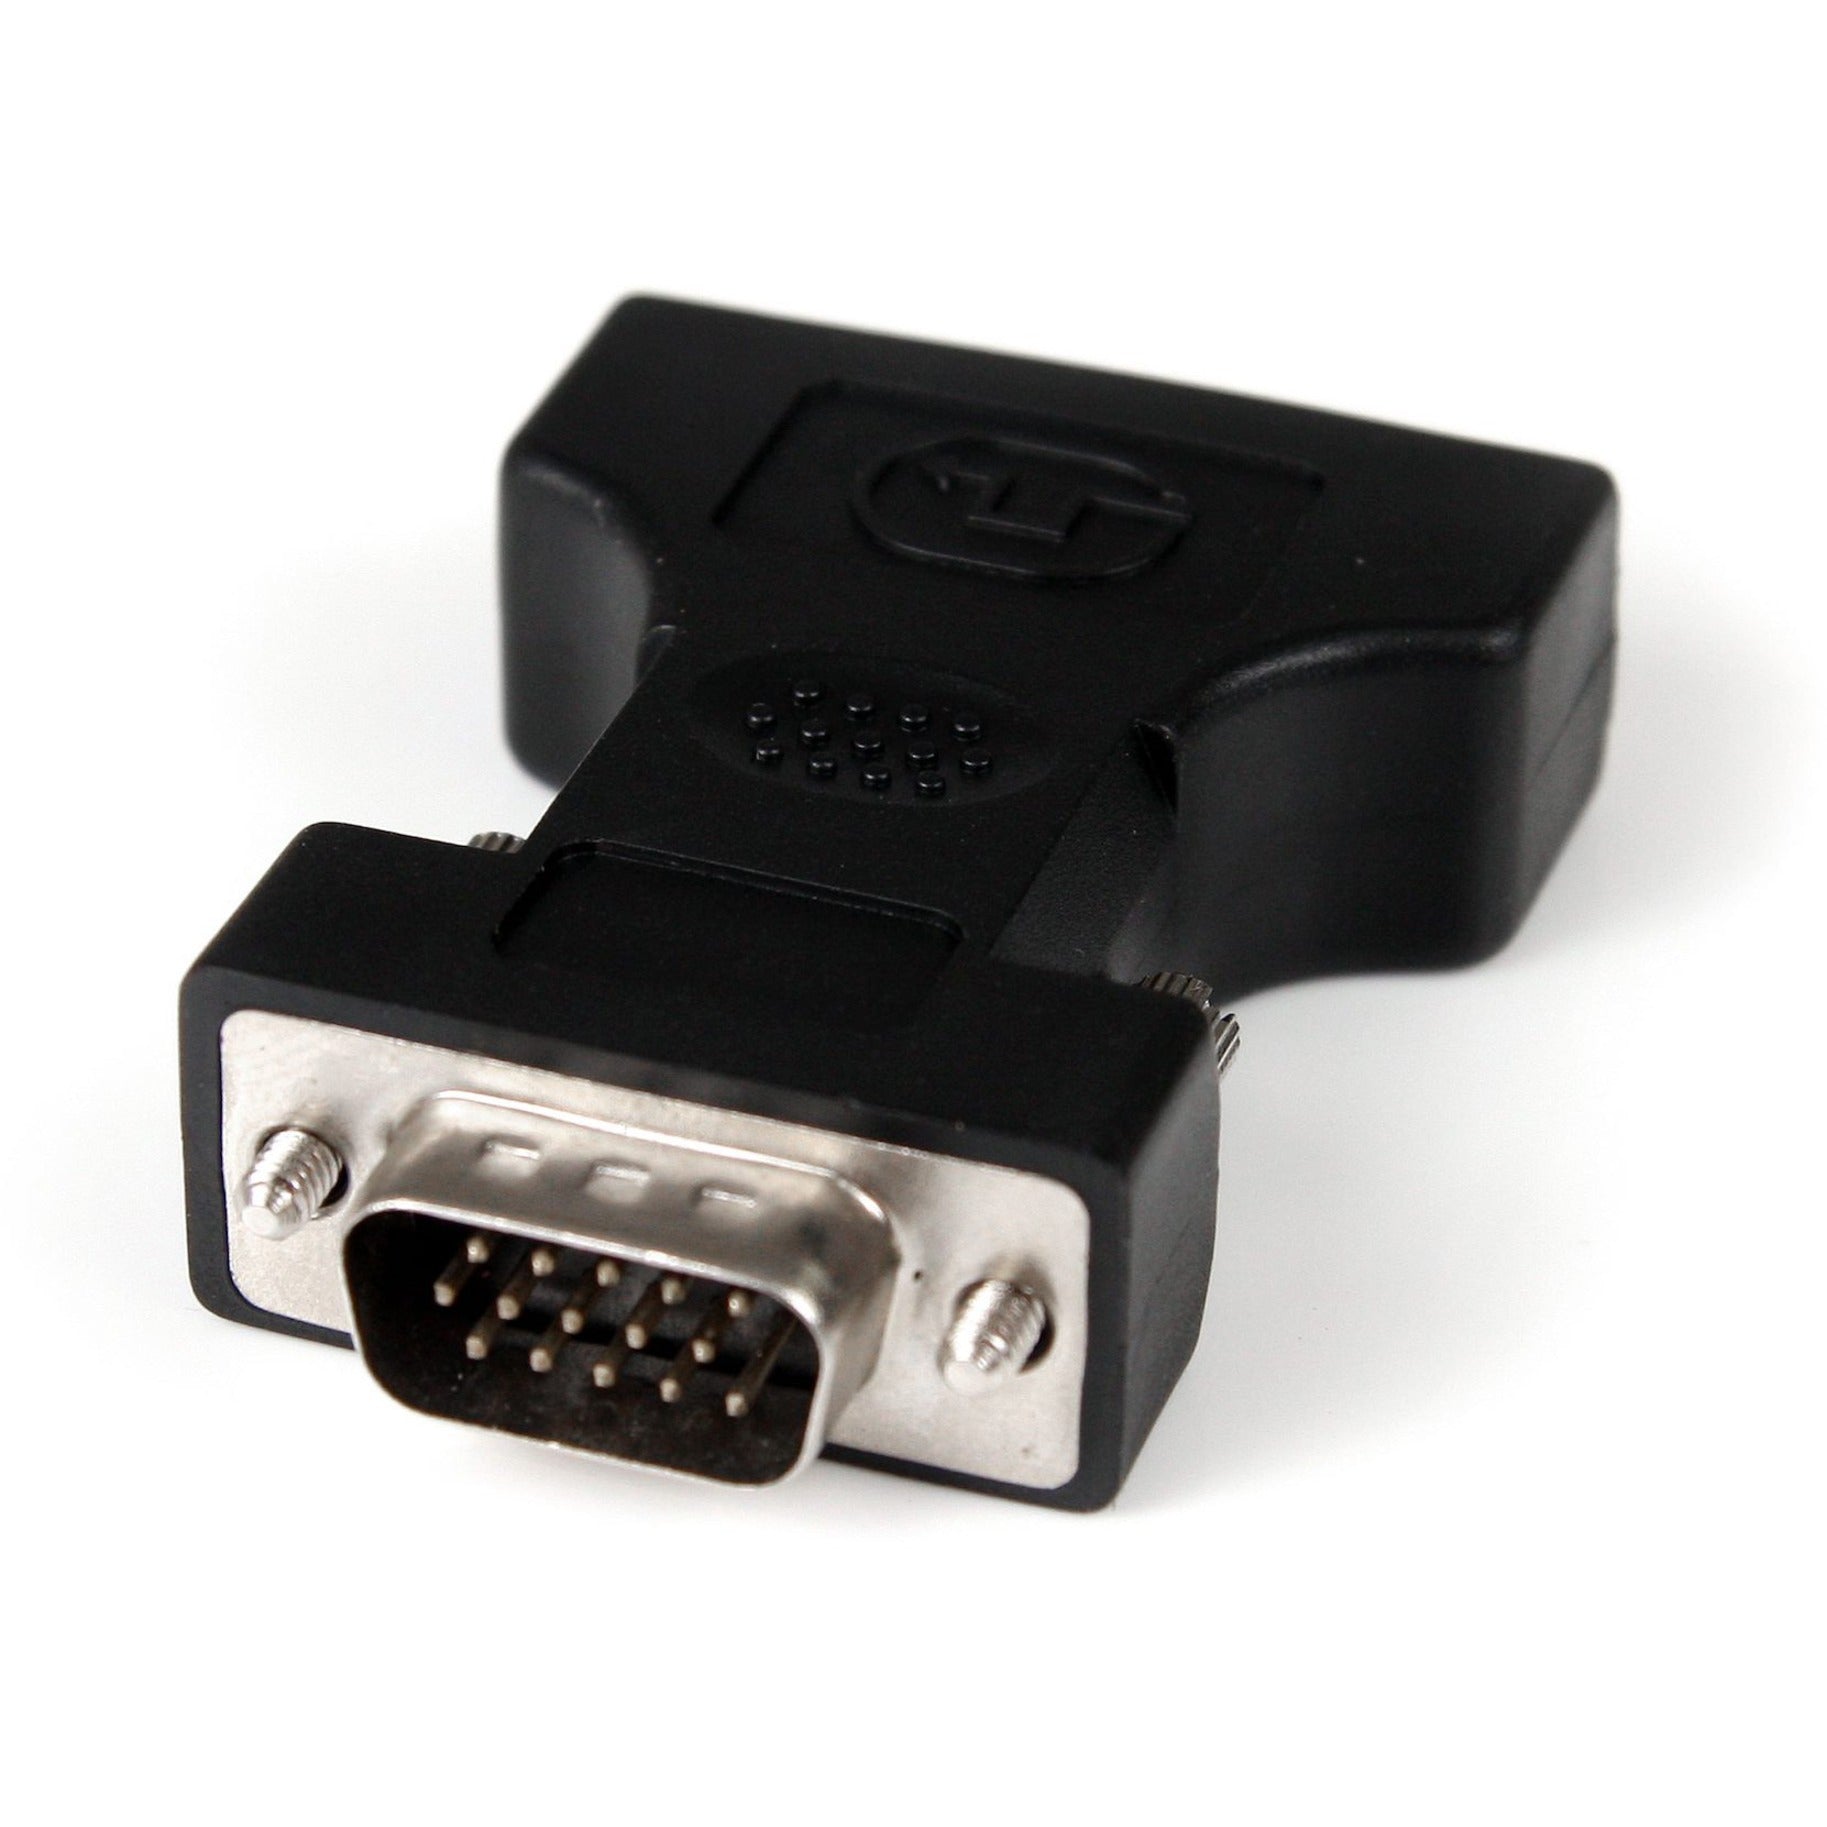 StarTech.com DVIVGAFMBK DVI to VGA Cable Adapter - Black, Male to Female